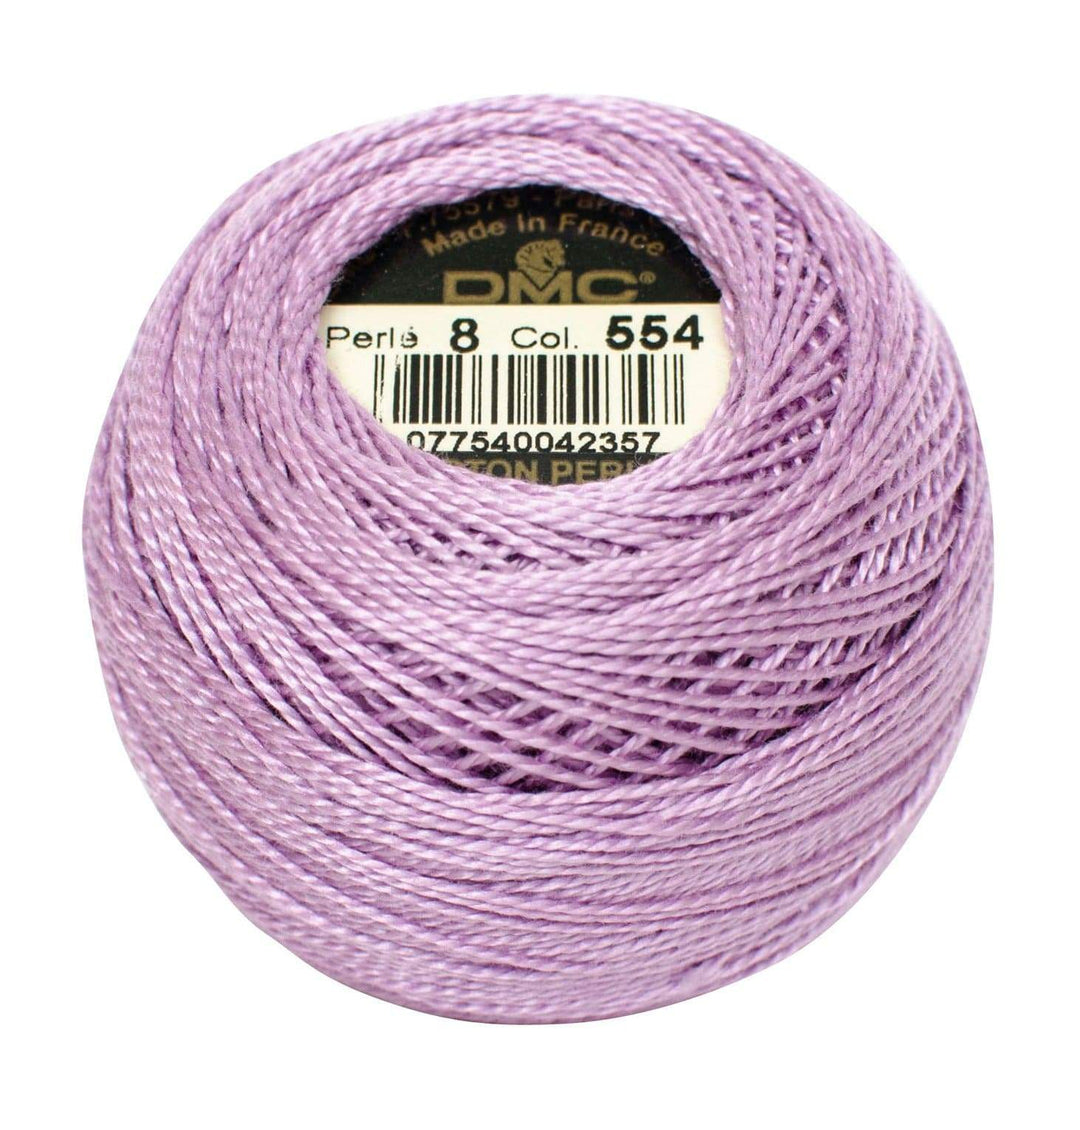 Size 8 Pearl Cotton Ball in Color 554 ~ Light Violet